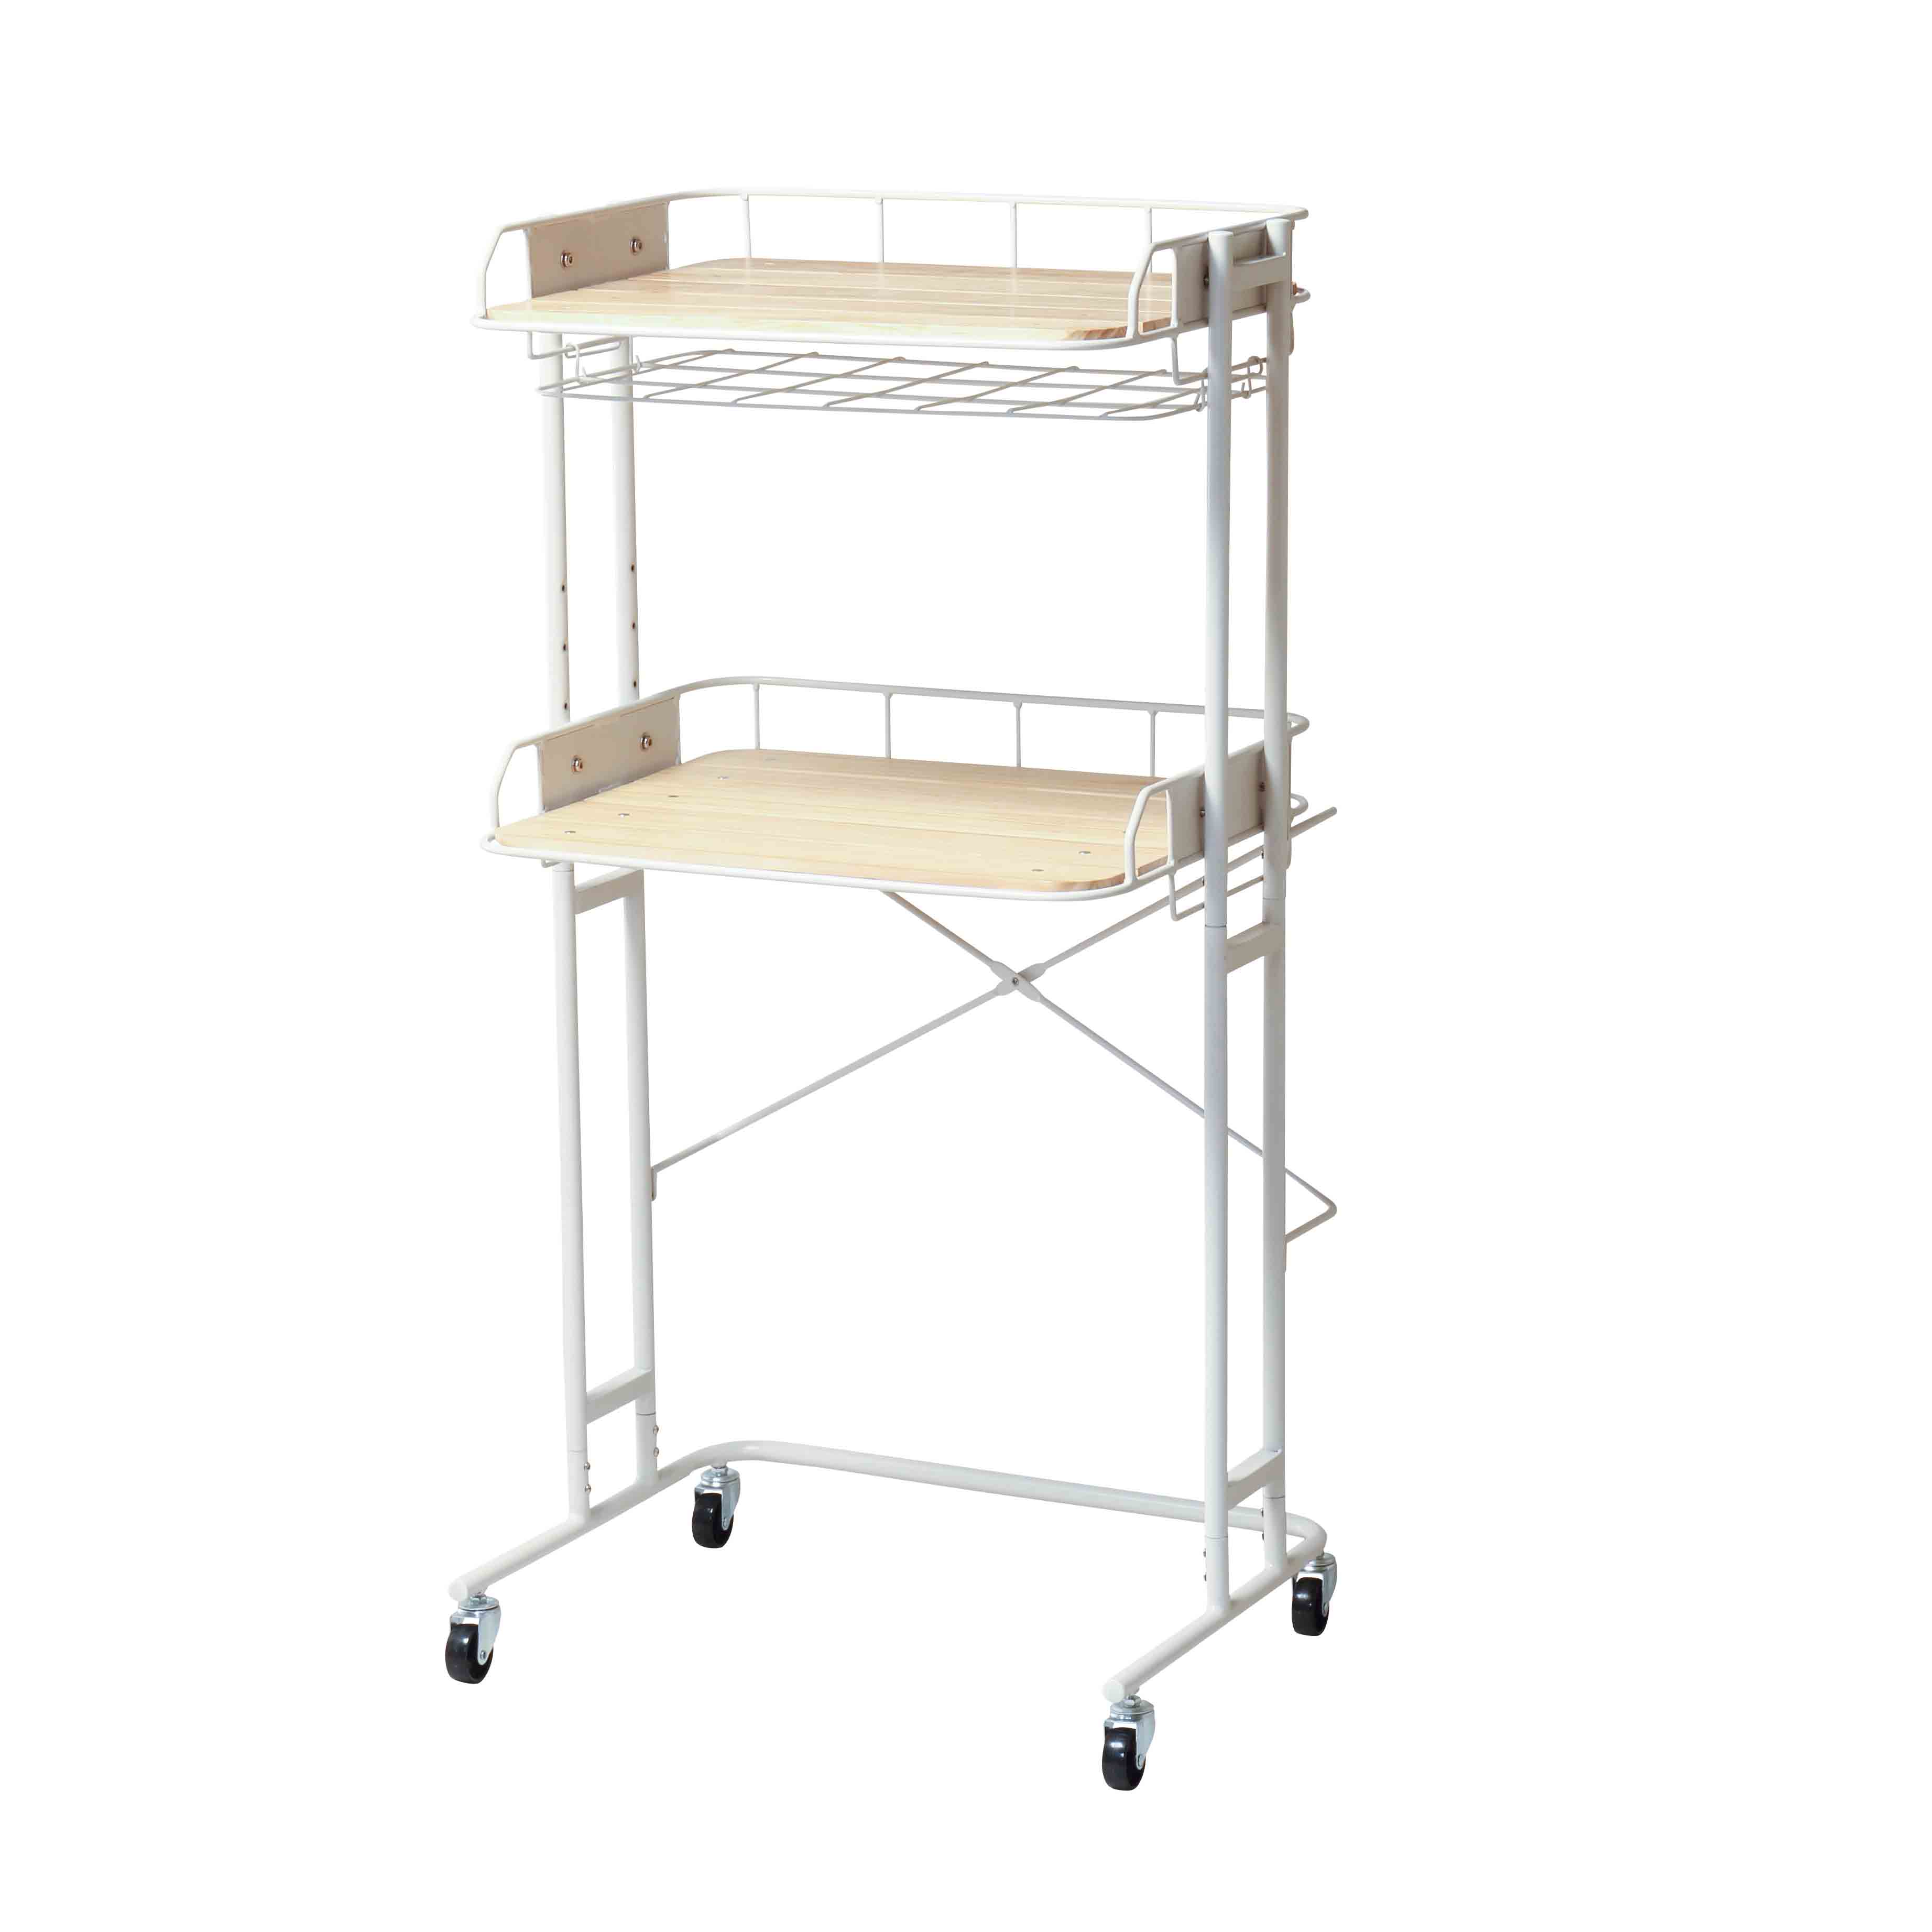 BY CAGE  KITCHEN RACK